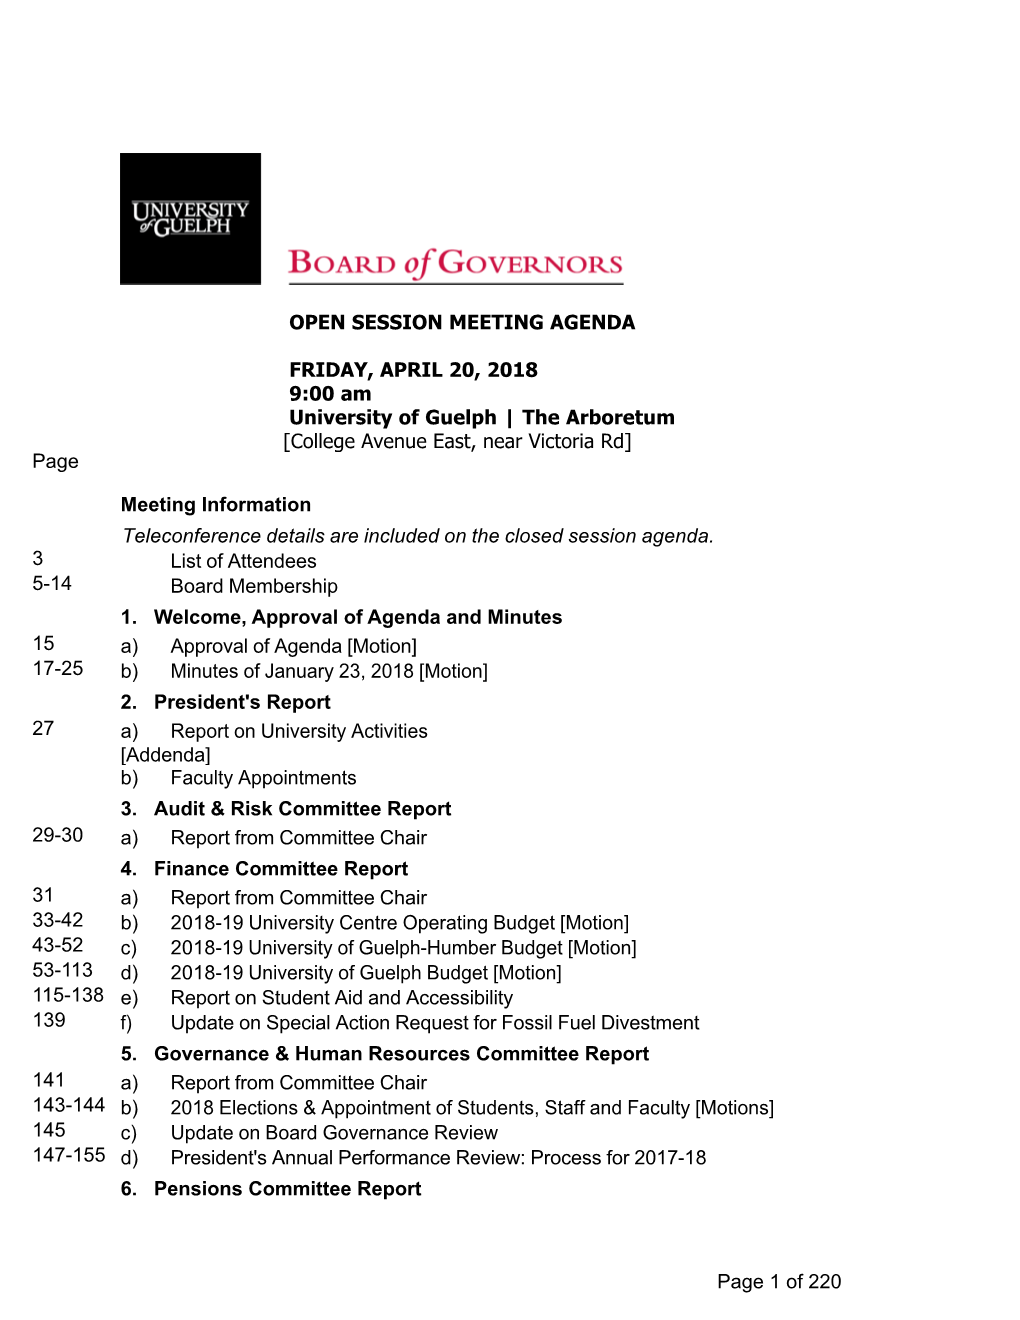 Open Session Meeting Agenda Friday